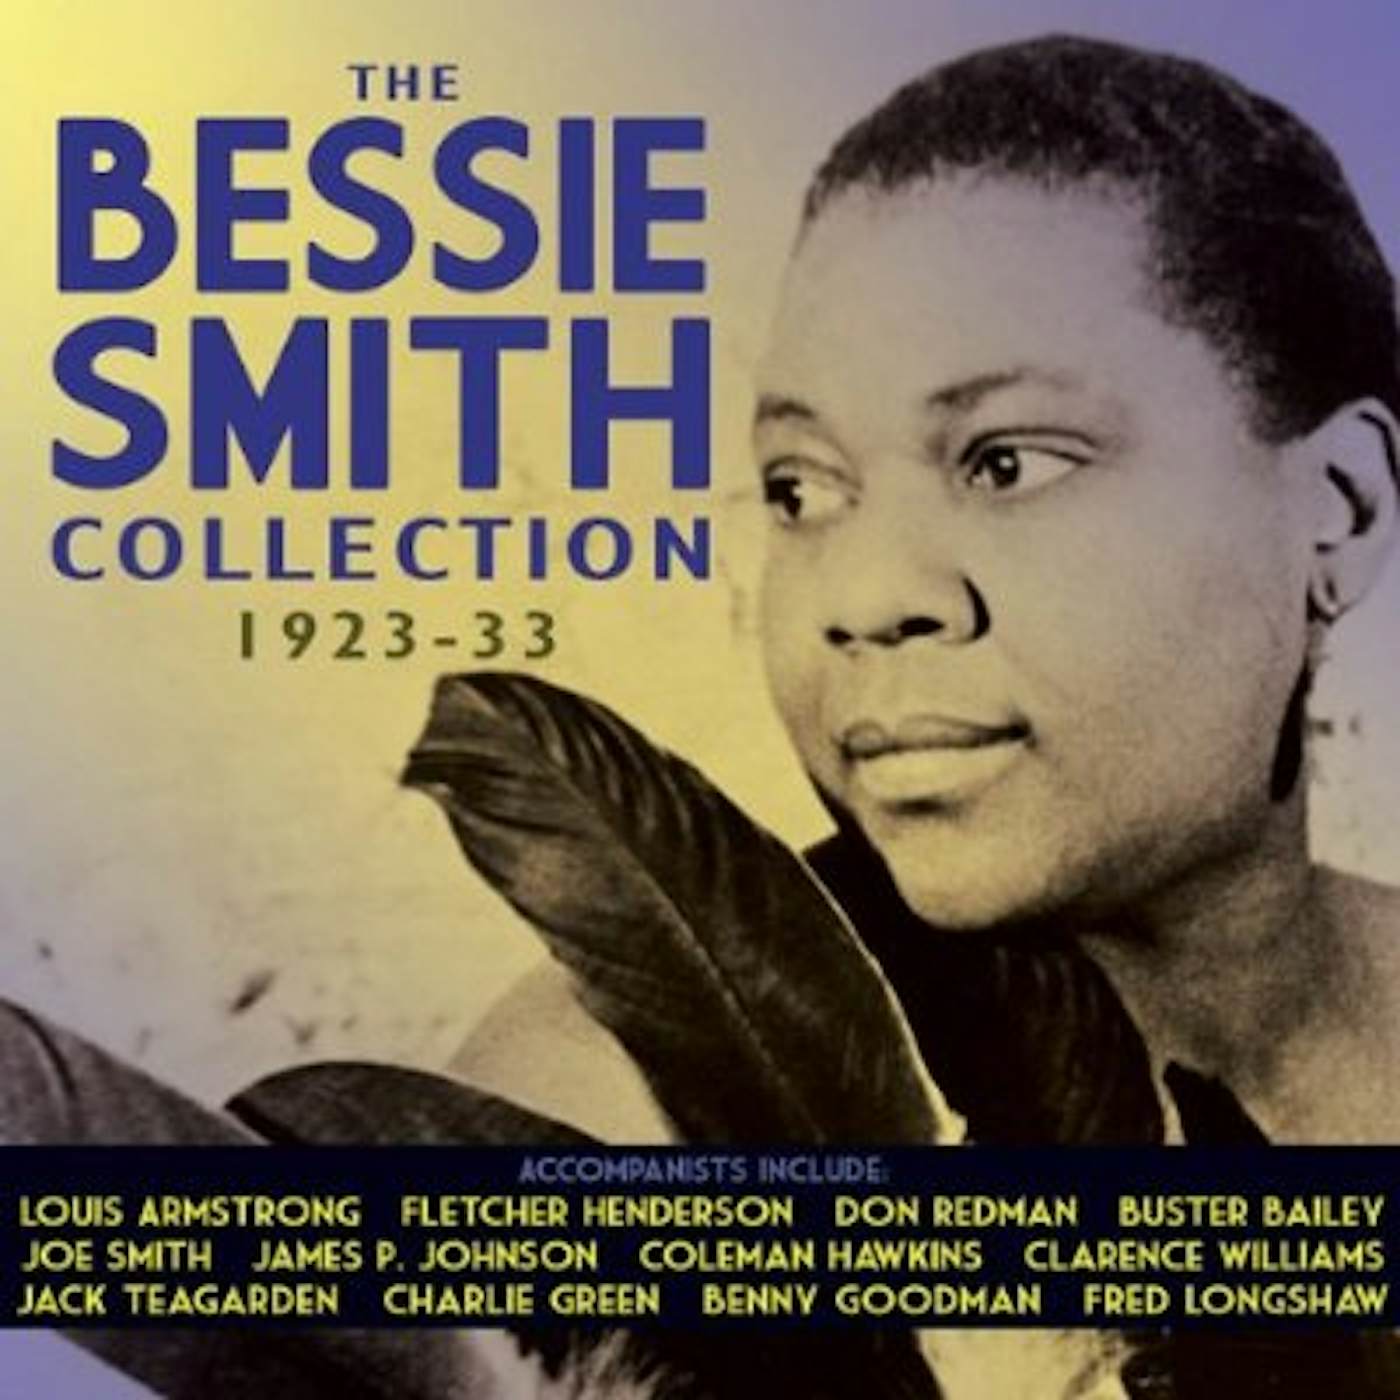 BESSIE SMITH COLLECTION 1923-33 CD